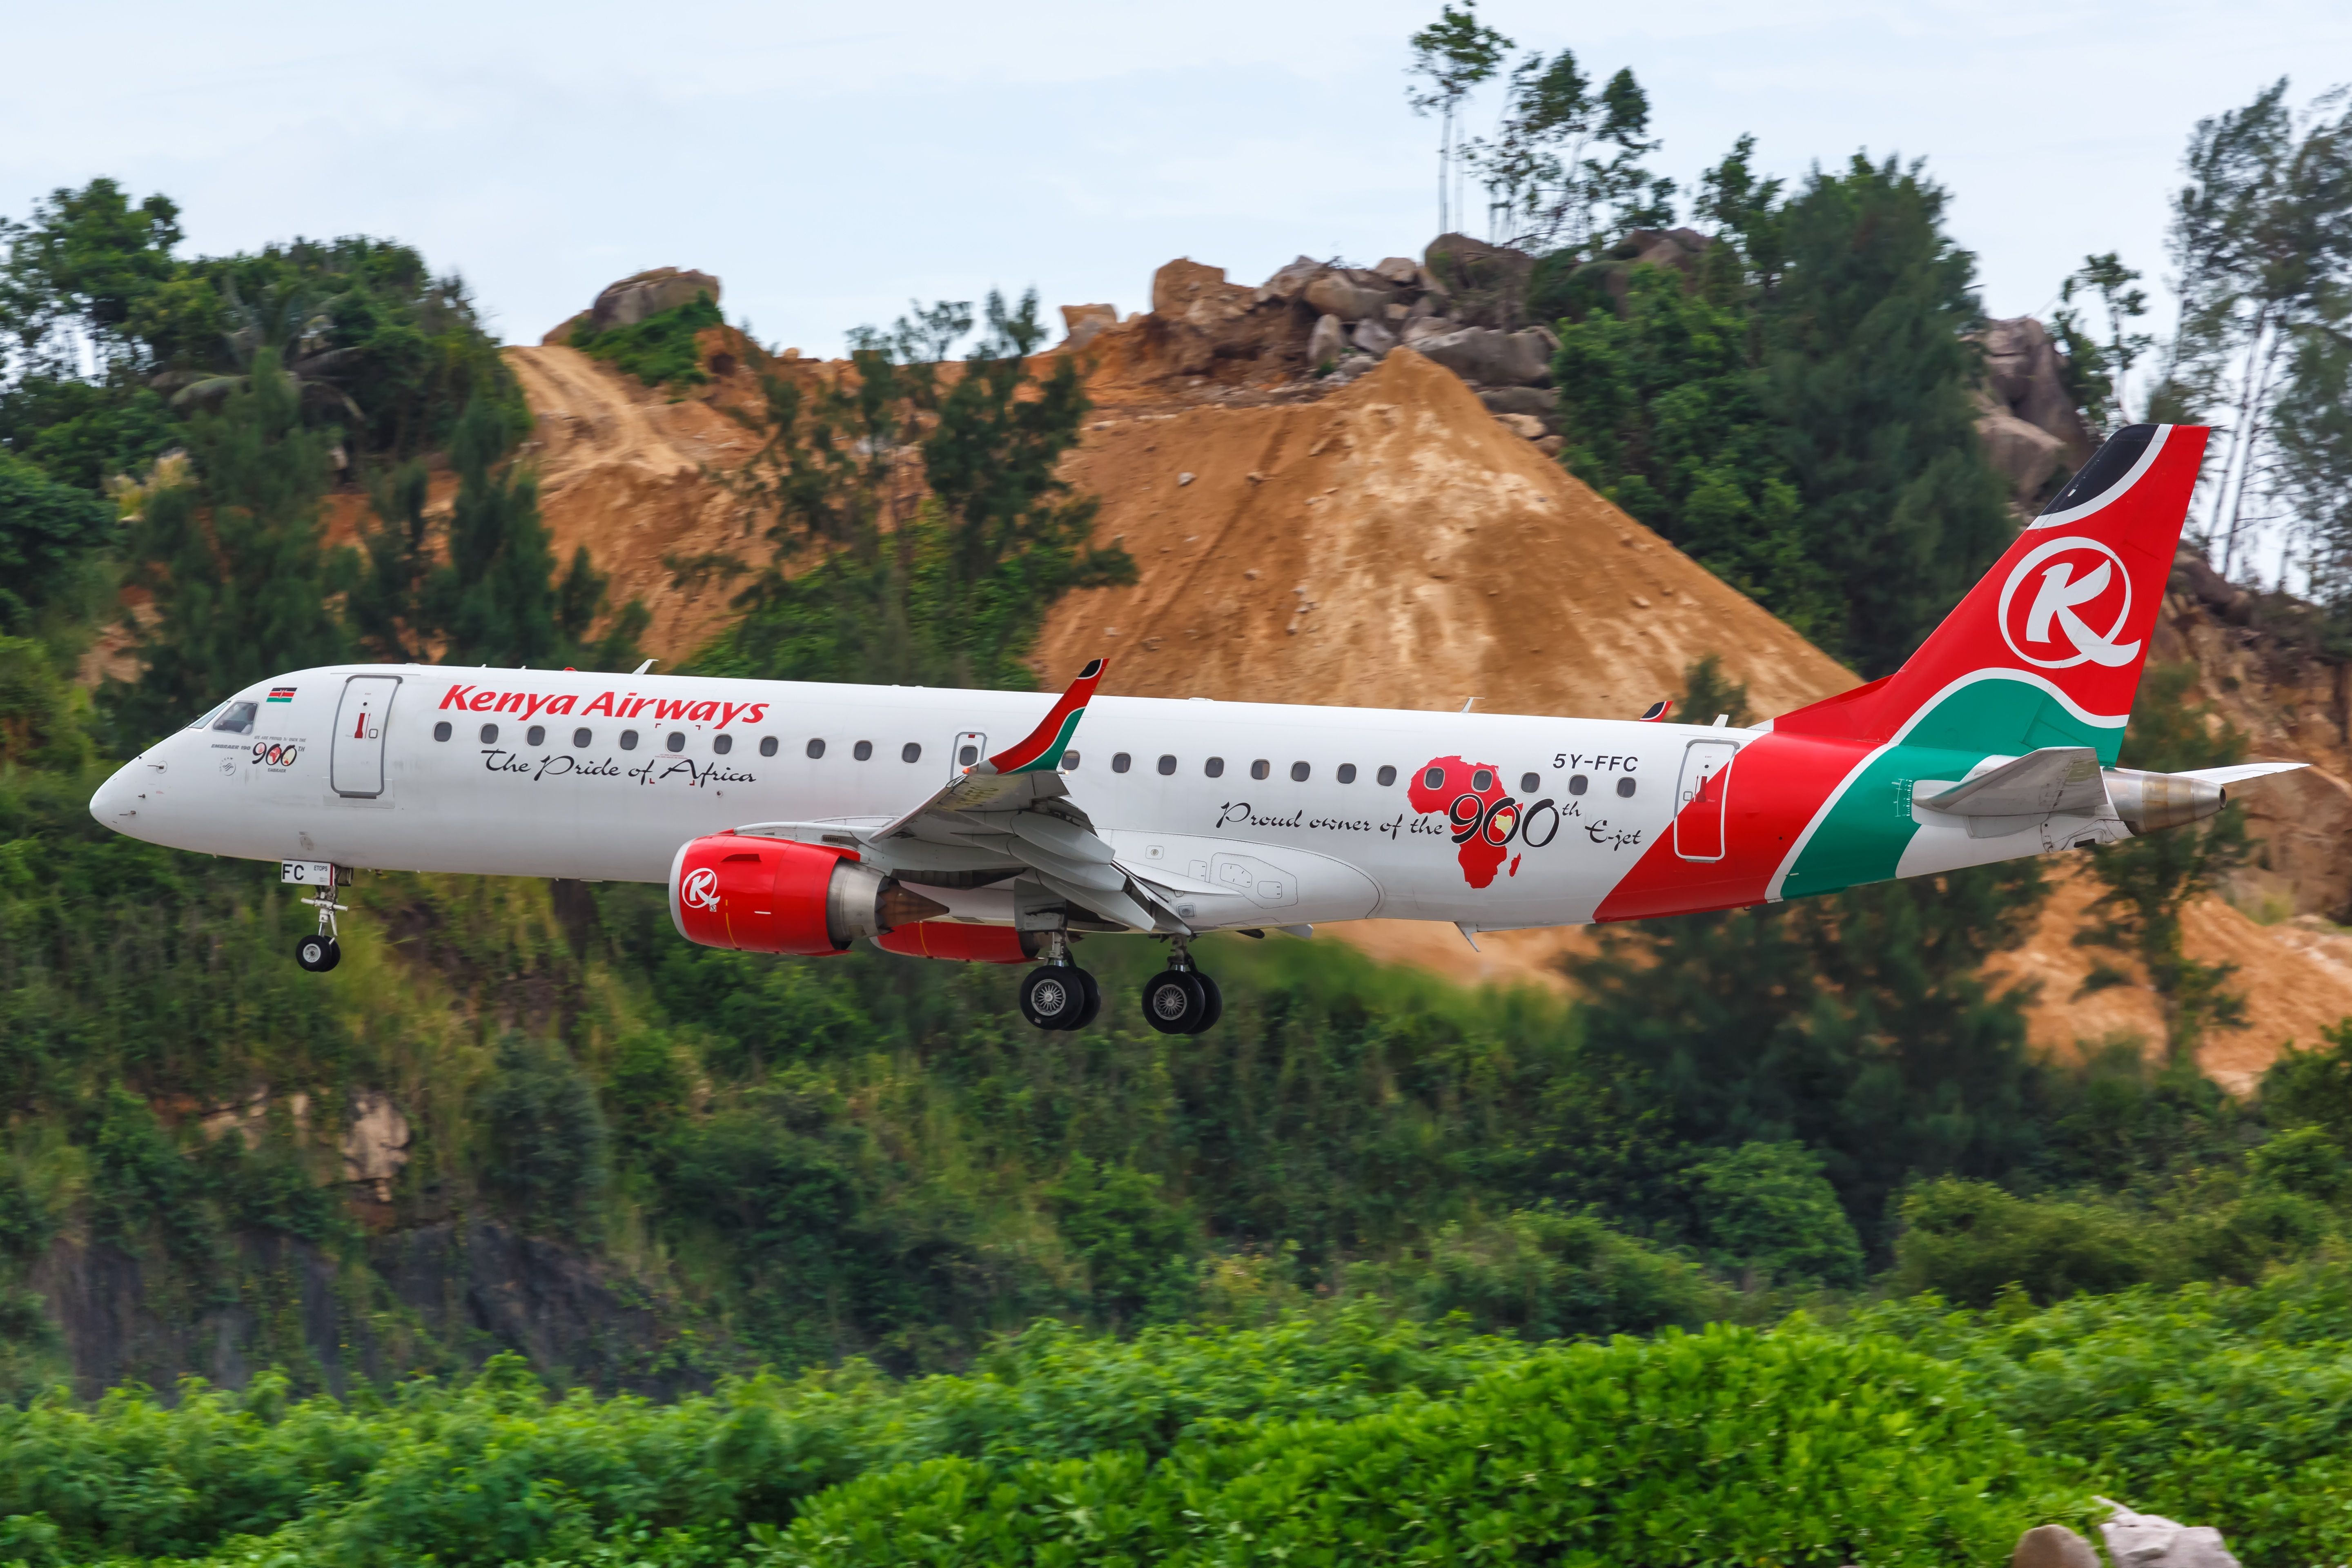 A Kenya Airways E190 about to land.